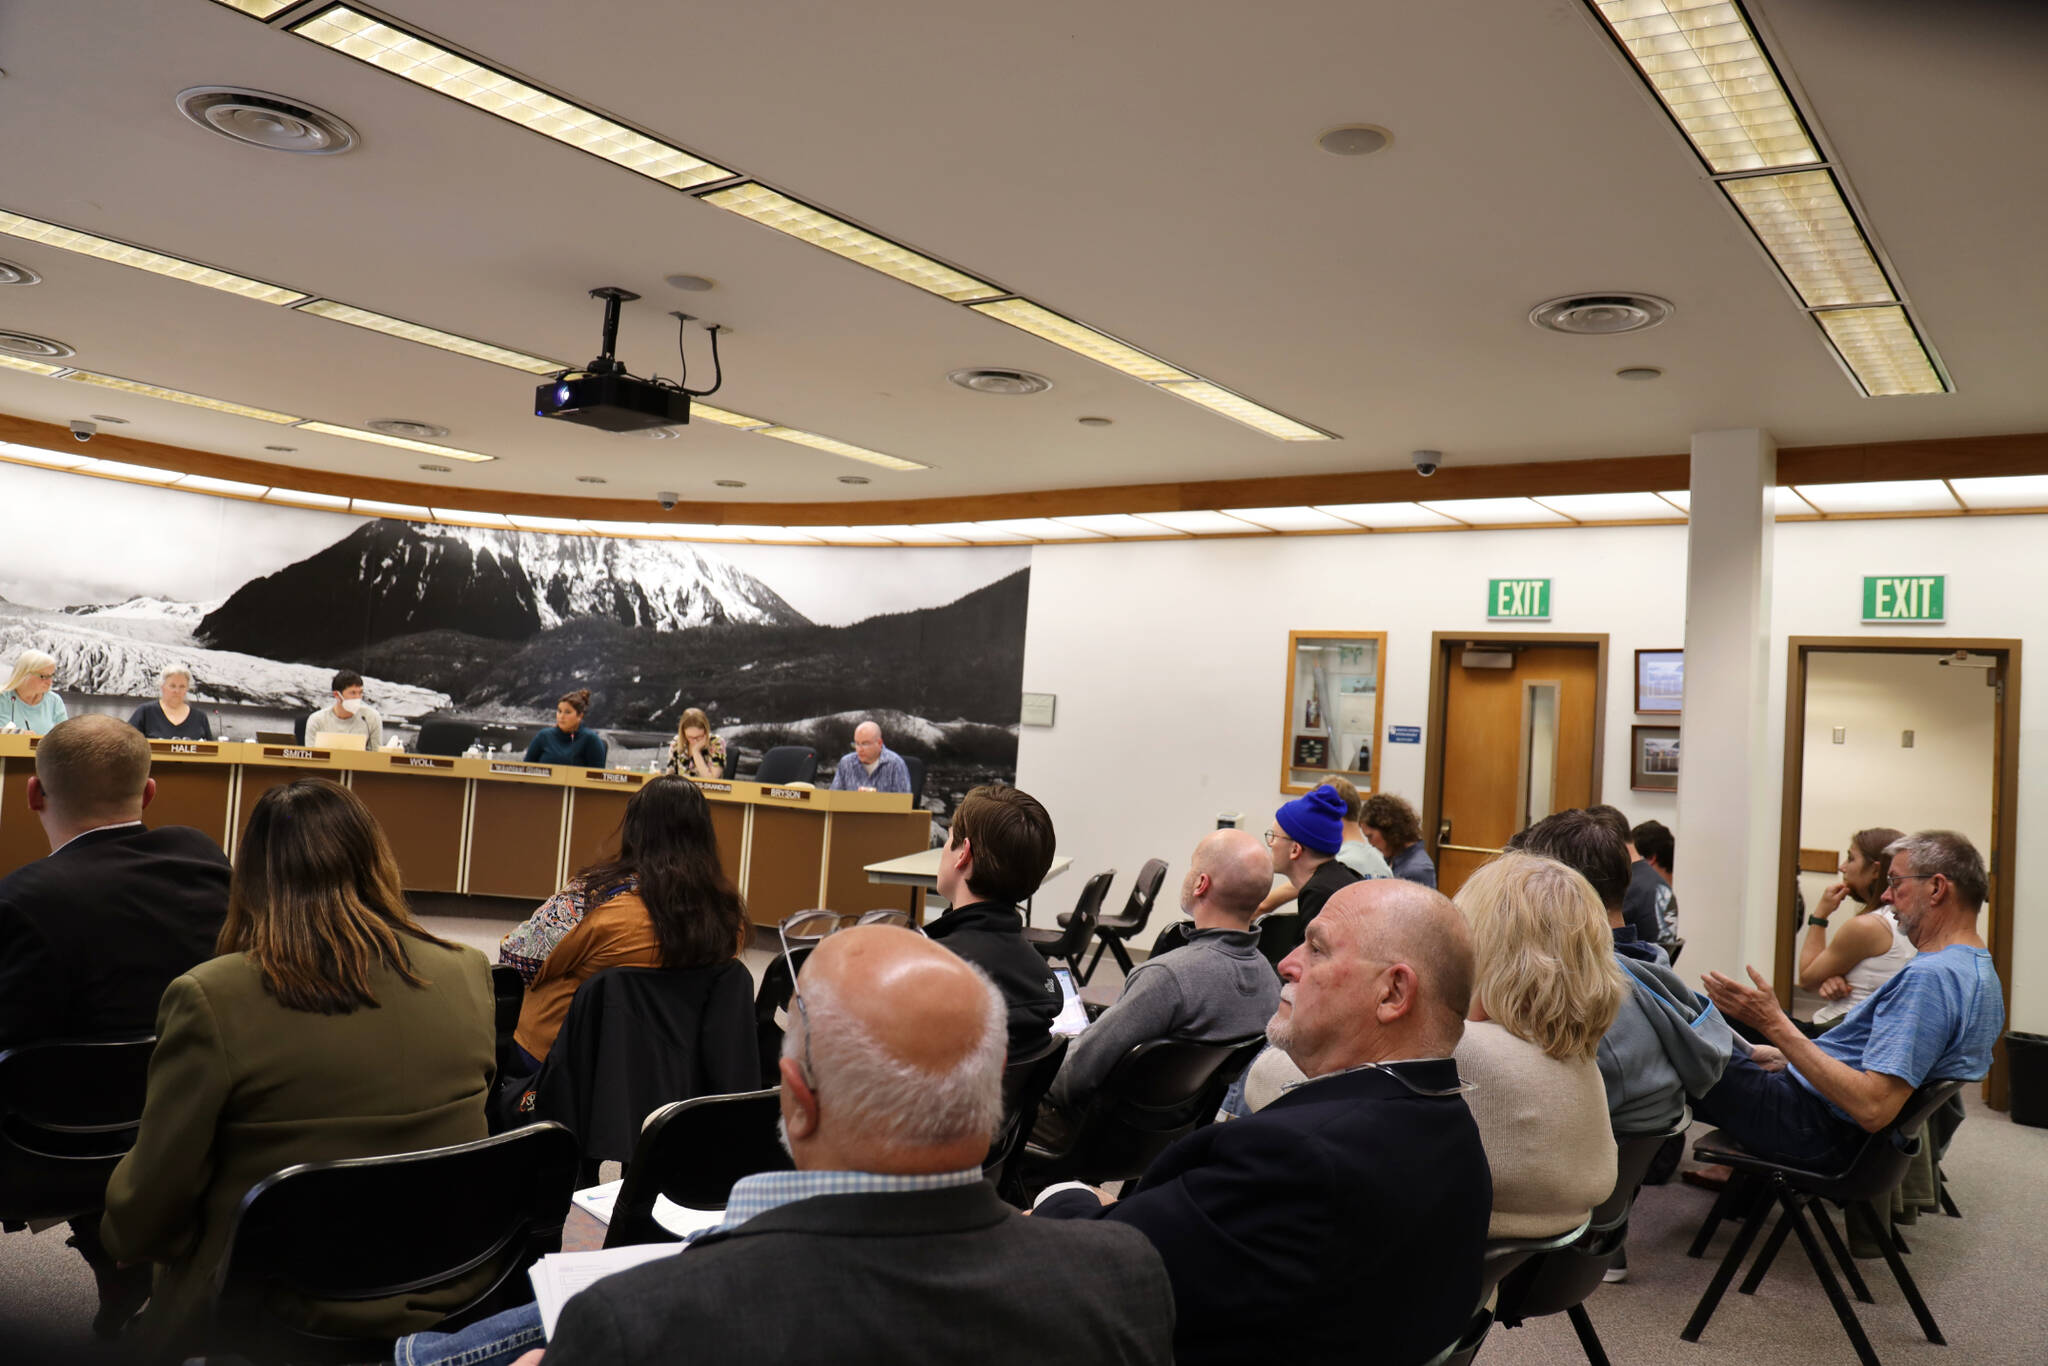 Residents and community leaders fill the Assembly chambers during the City and Borough of Juneau Assembly Finance Committee meeting Wednesday night. The Assembly made decisions on what community funding requests would receive funding and what would not. (Clarise Larson / Juneau Empire)